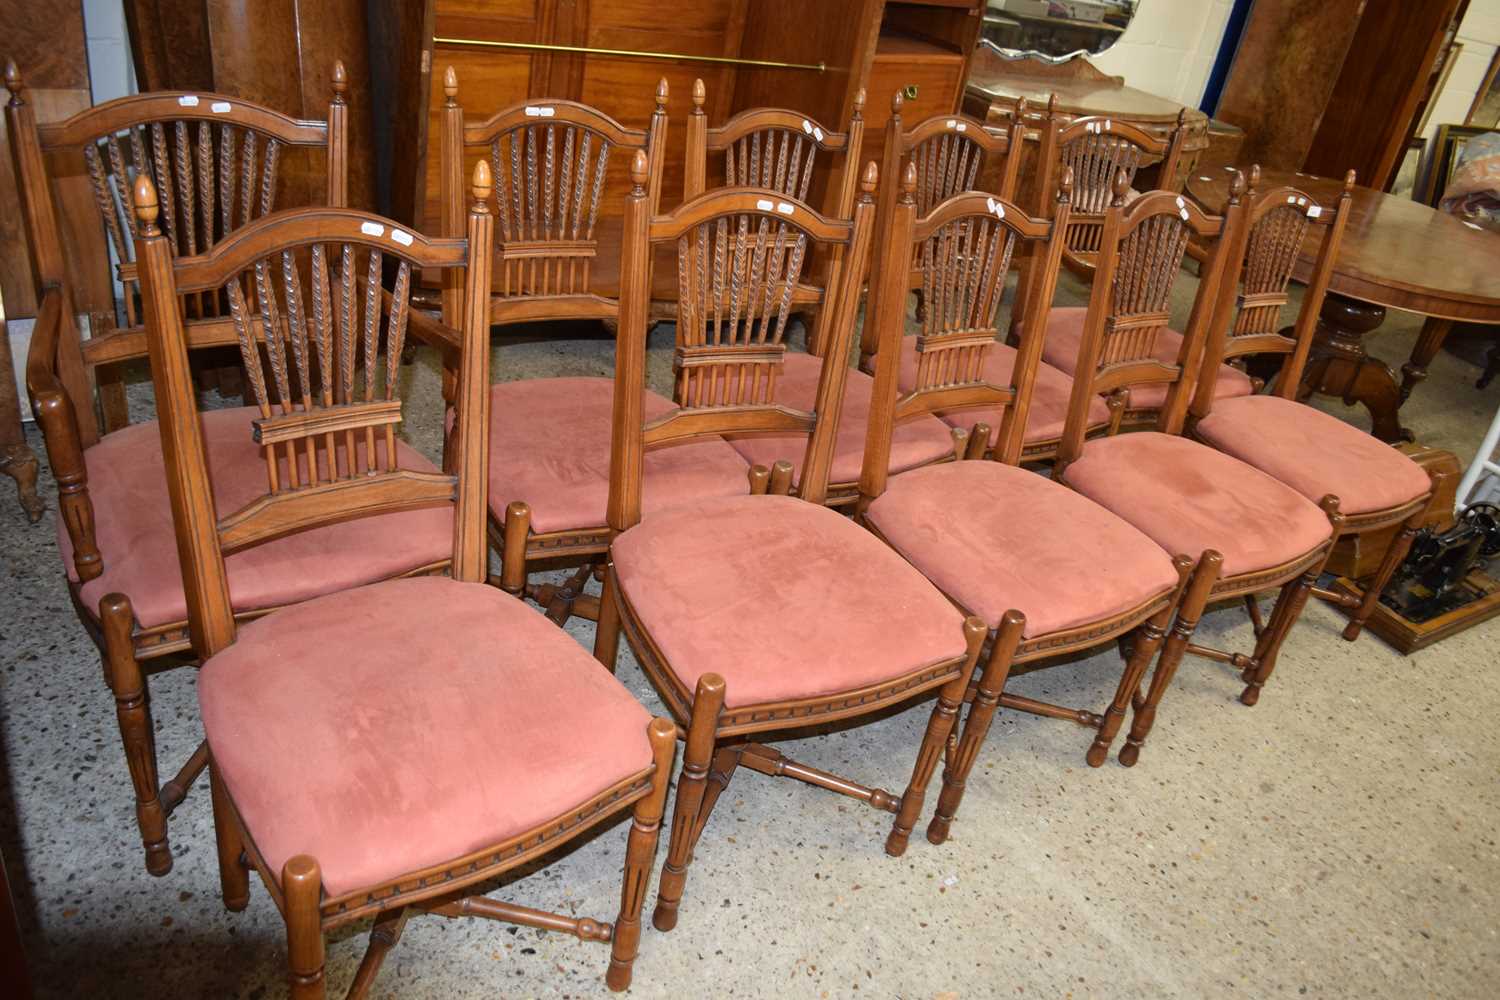 Ten reproduction dining chairs with red upholstered seats